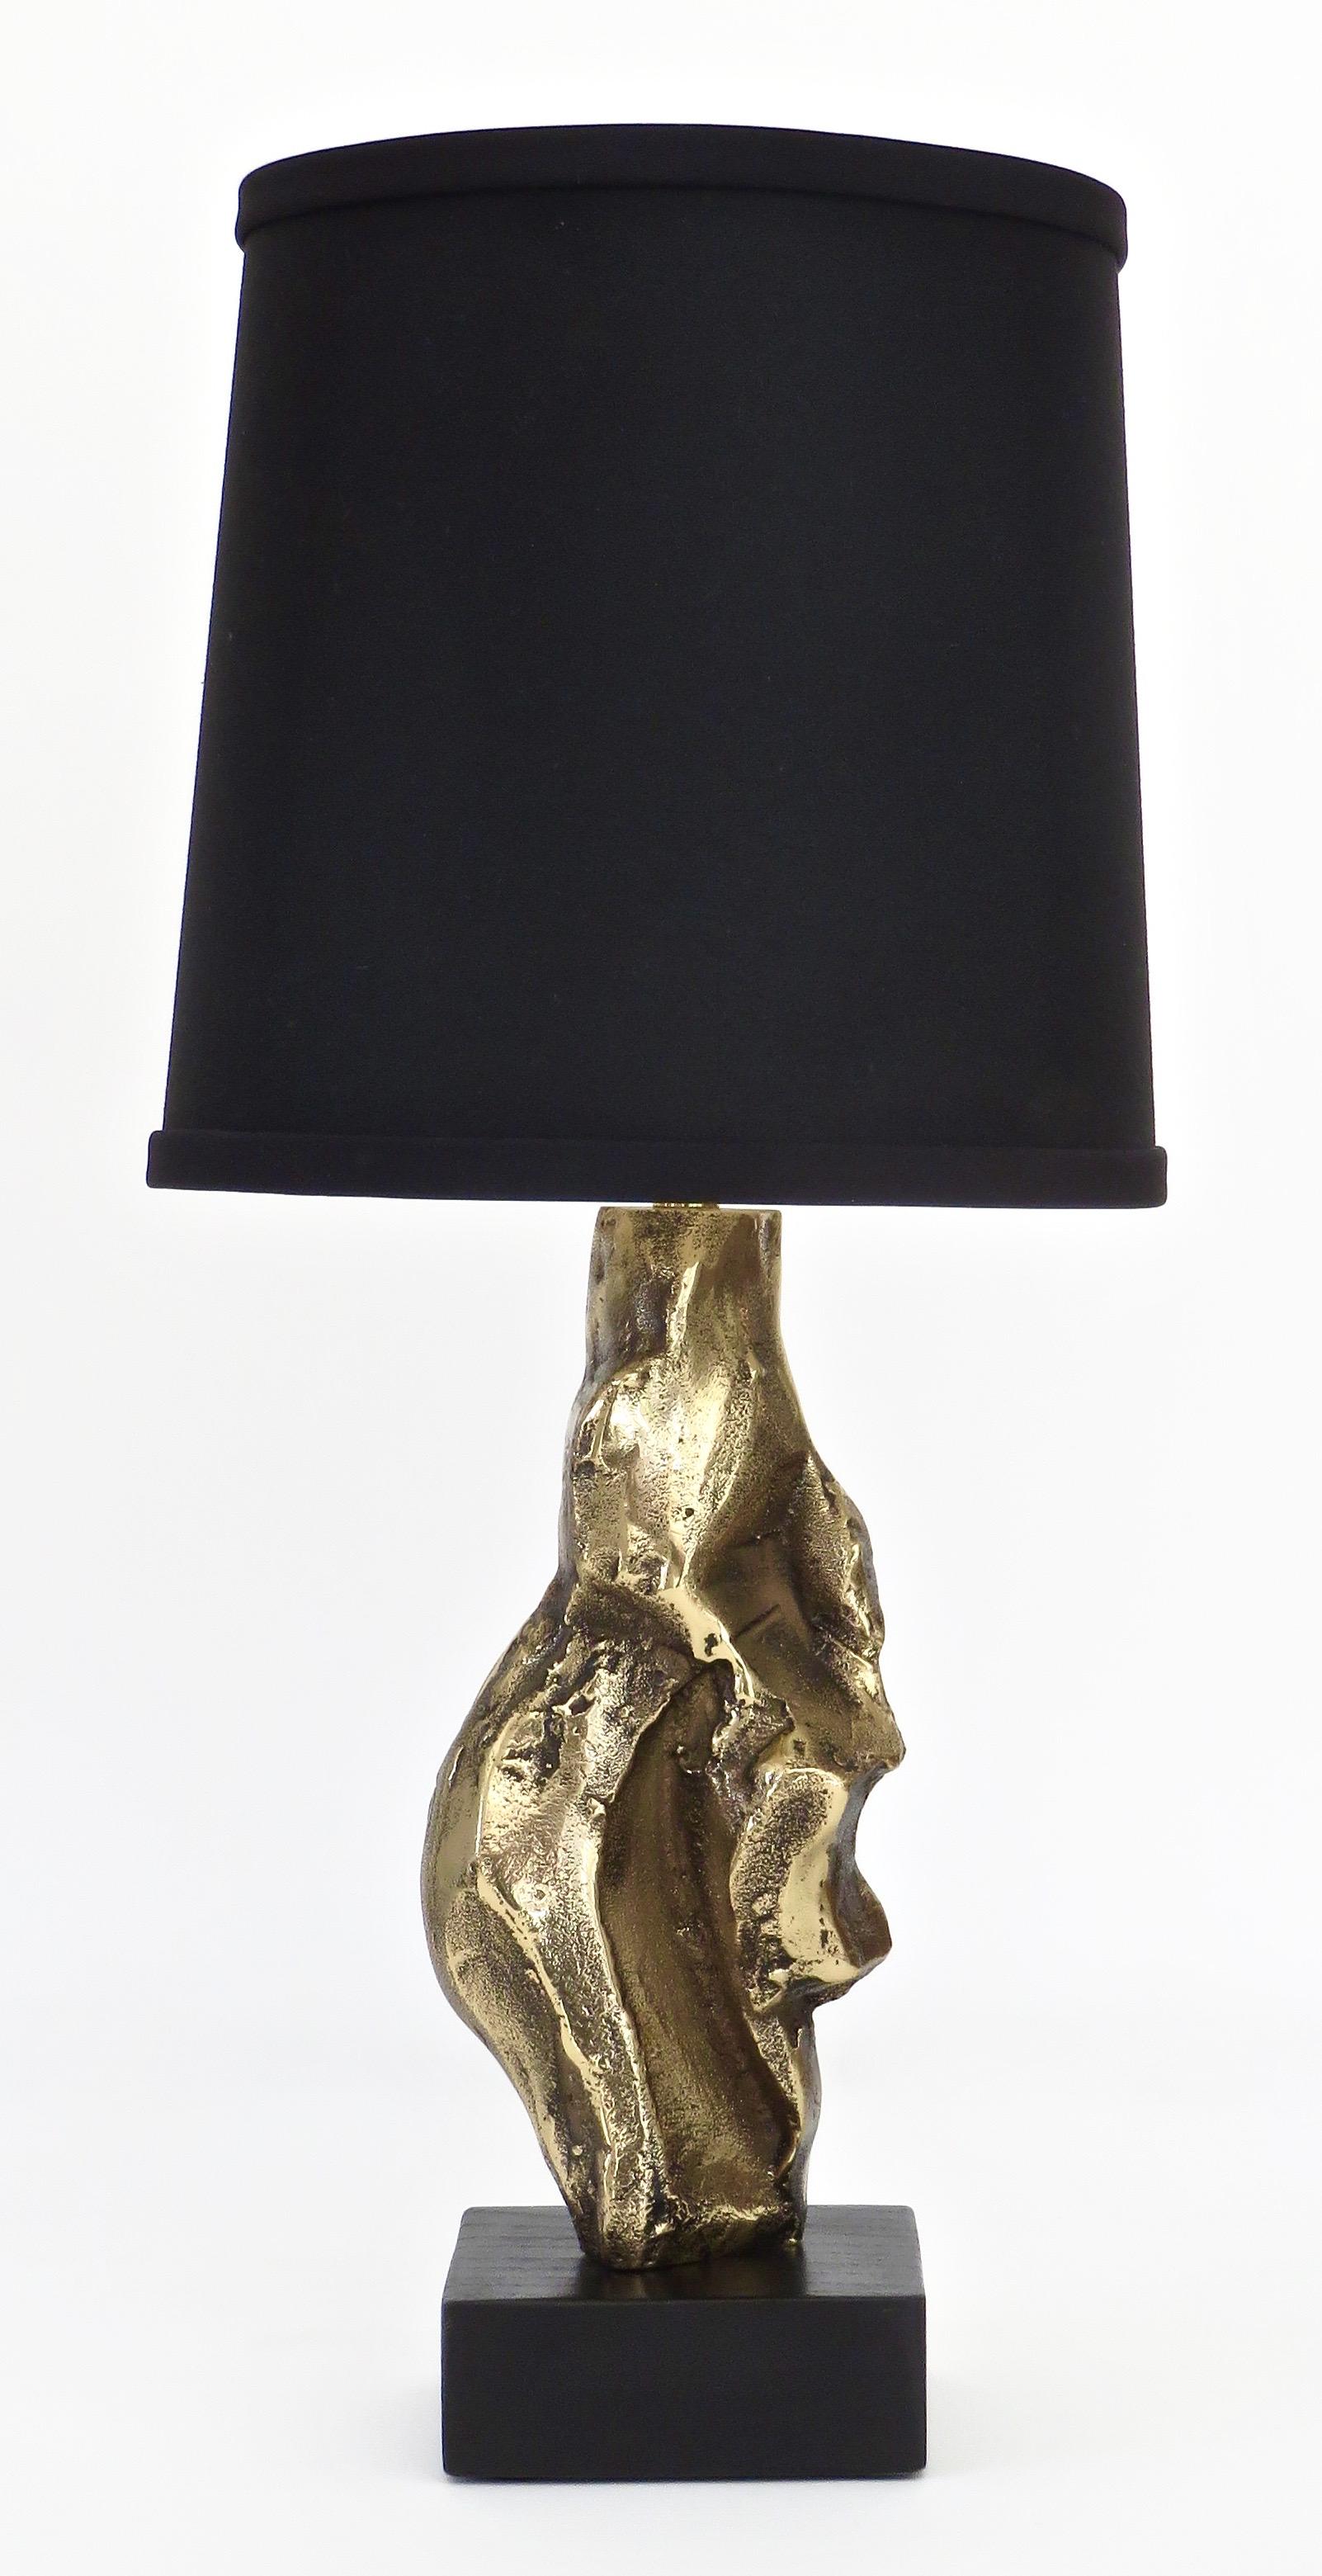 A pair French cast bronze sculptural table lamps, signed M Jaubert, France, circa 1960-1970
Composed of a cast abstract bronze abstract organic sculpture on a black wood base.
Signed near bottom on bronze.
Please note the table lamp has been